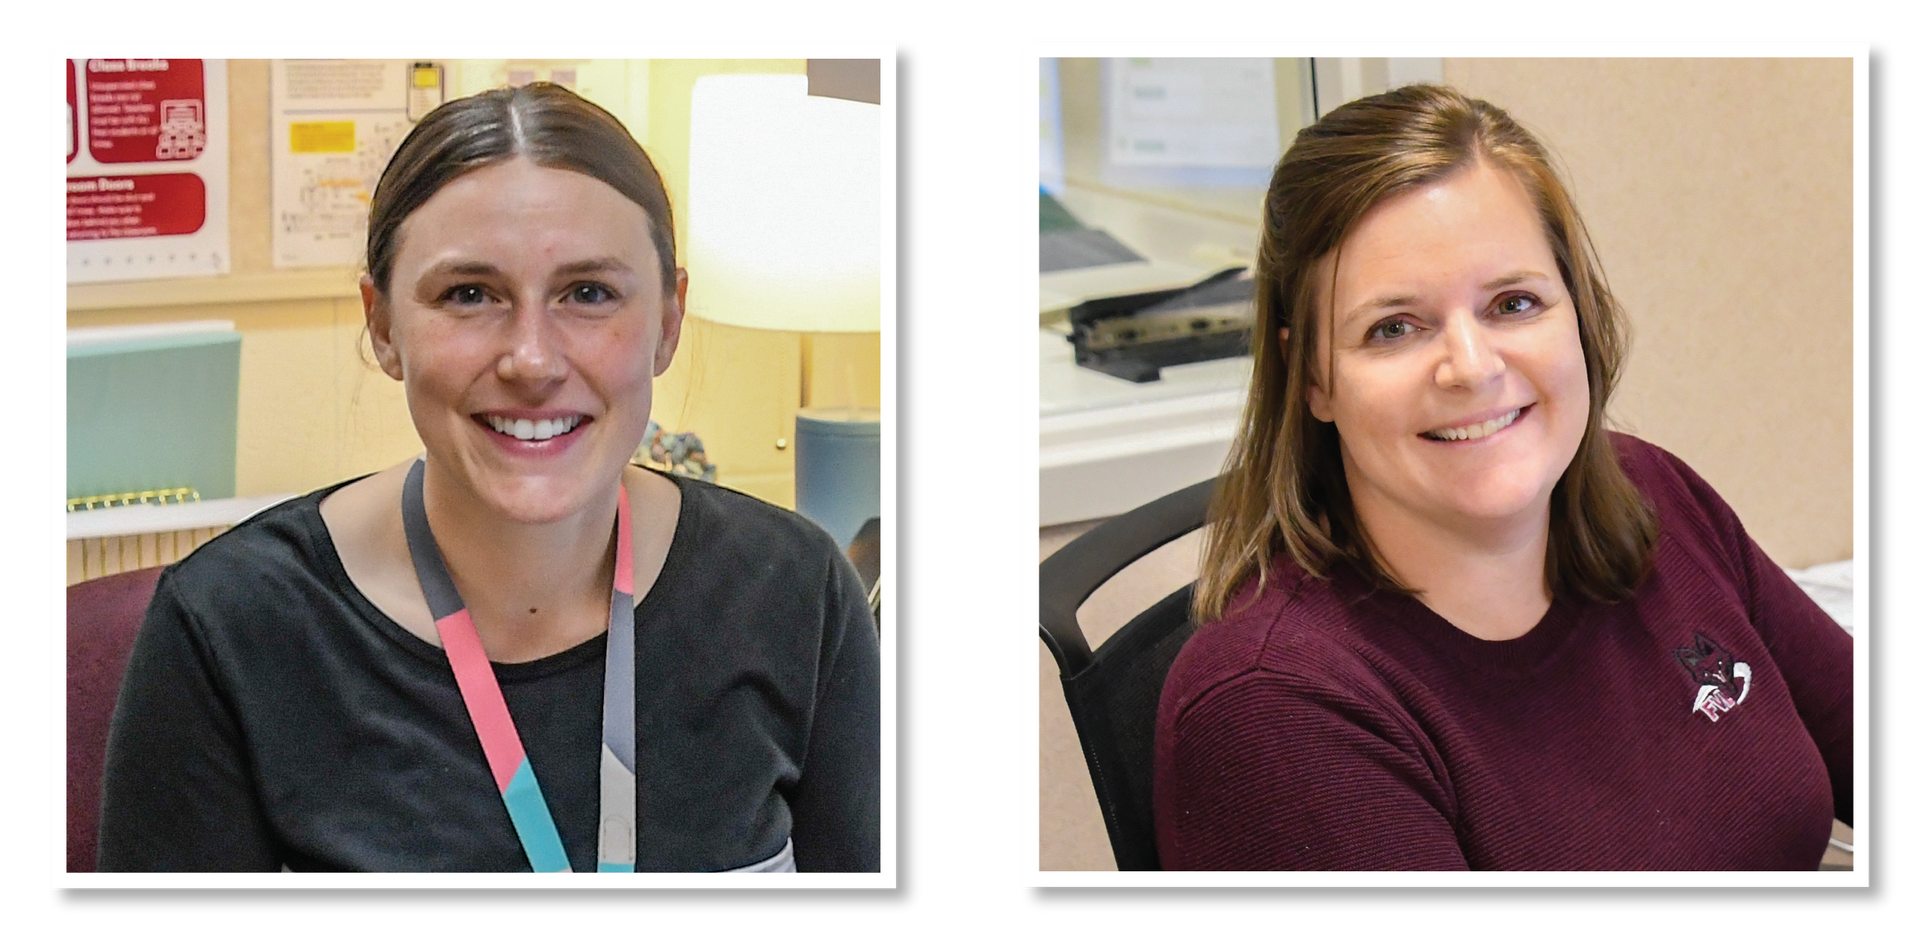 Kristen Zuberbier is pictured on the left and Amanda Voight is pictured on the right - both sitting at their desks, smiling